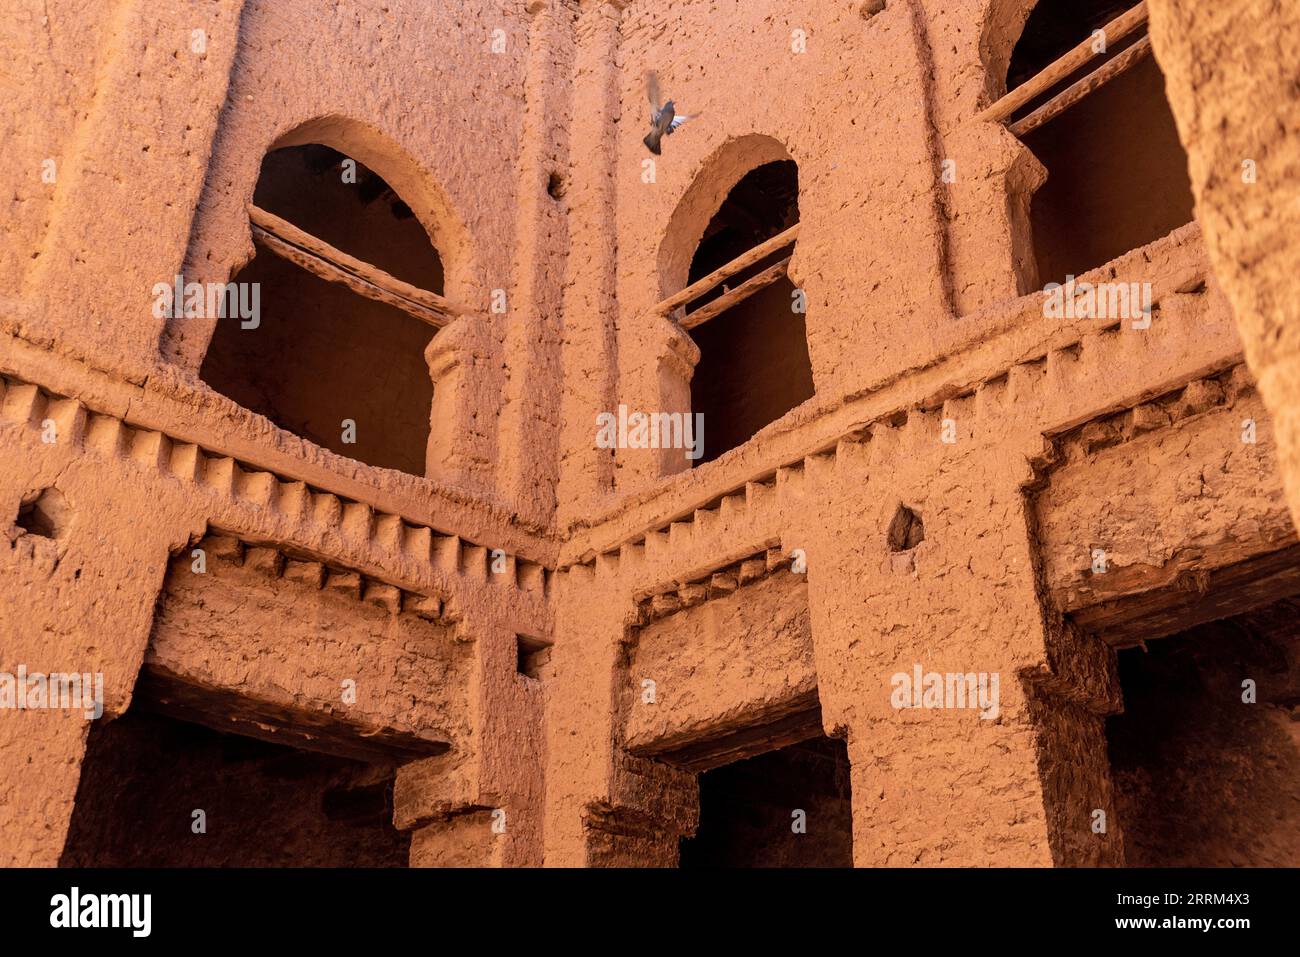 Windows in an inner courtyard of a typcial berber house in a derelict, abandoned house in Tamenougalt in the Draa valley, Morocco Stock Photo